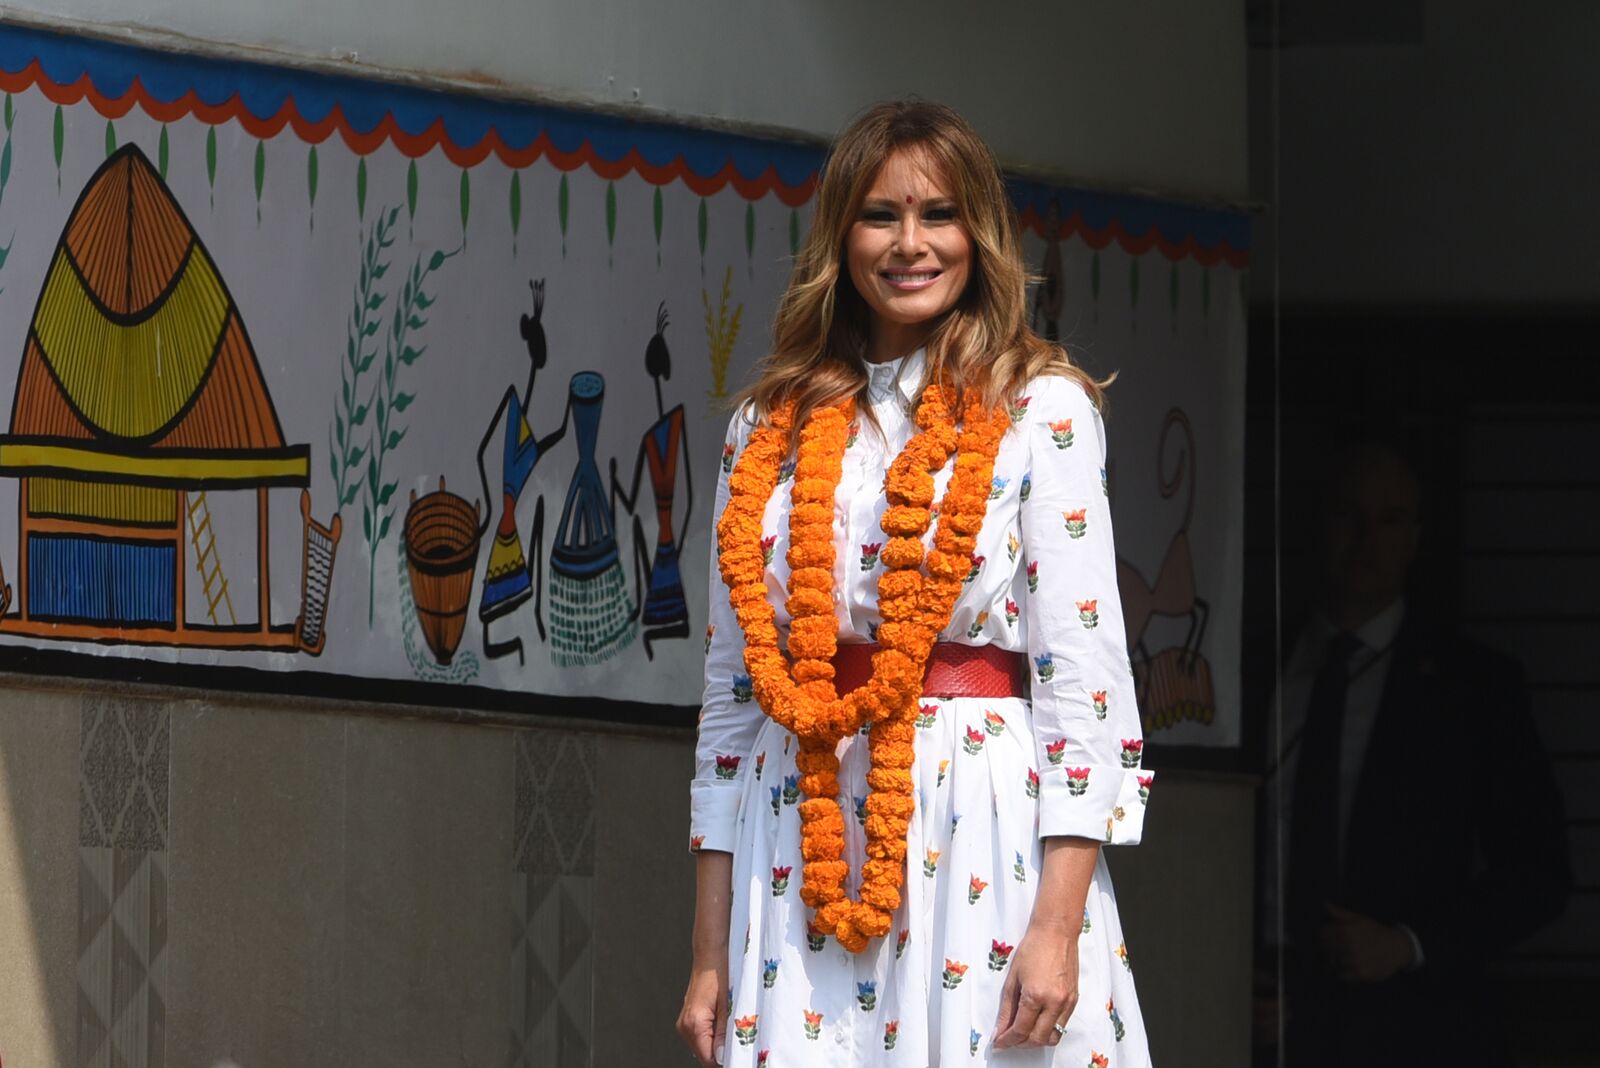 Melania Trump during an interaction with students of Sarvodaya Co-Educational Senior Secondary School at Moti Bagh on February 25, 2020, in New Delhi, India | Photo: Sanchit Khanna/Hindustan Times/Getty Images